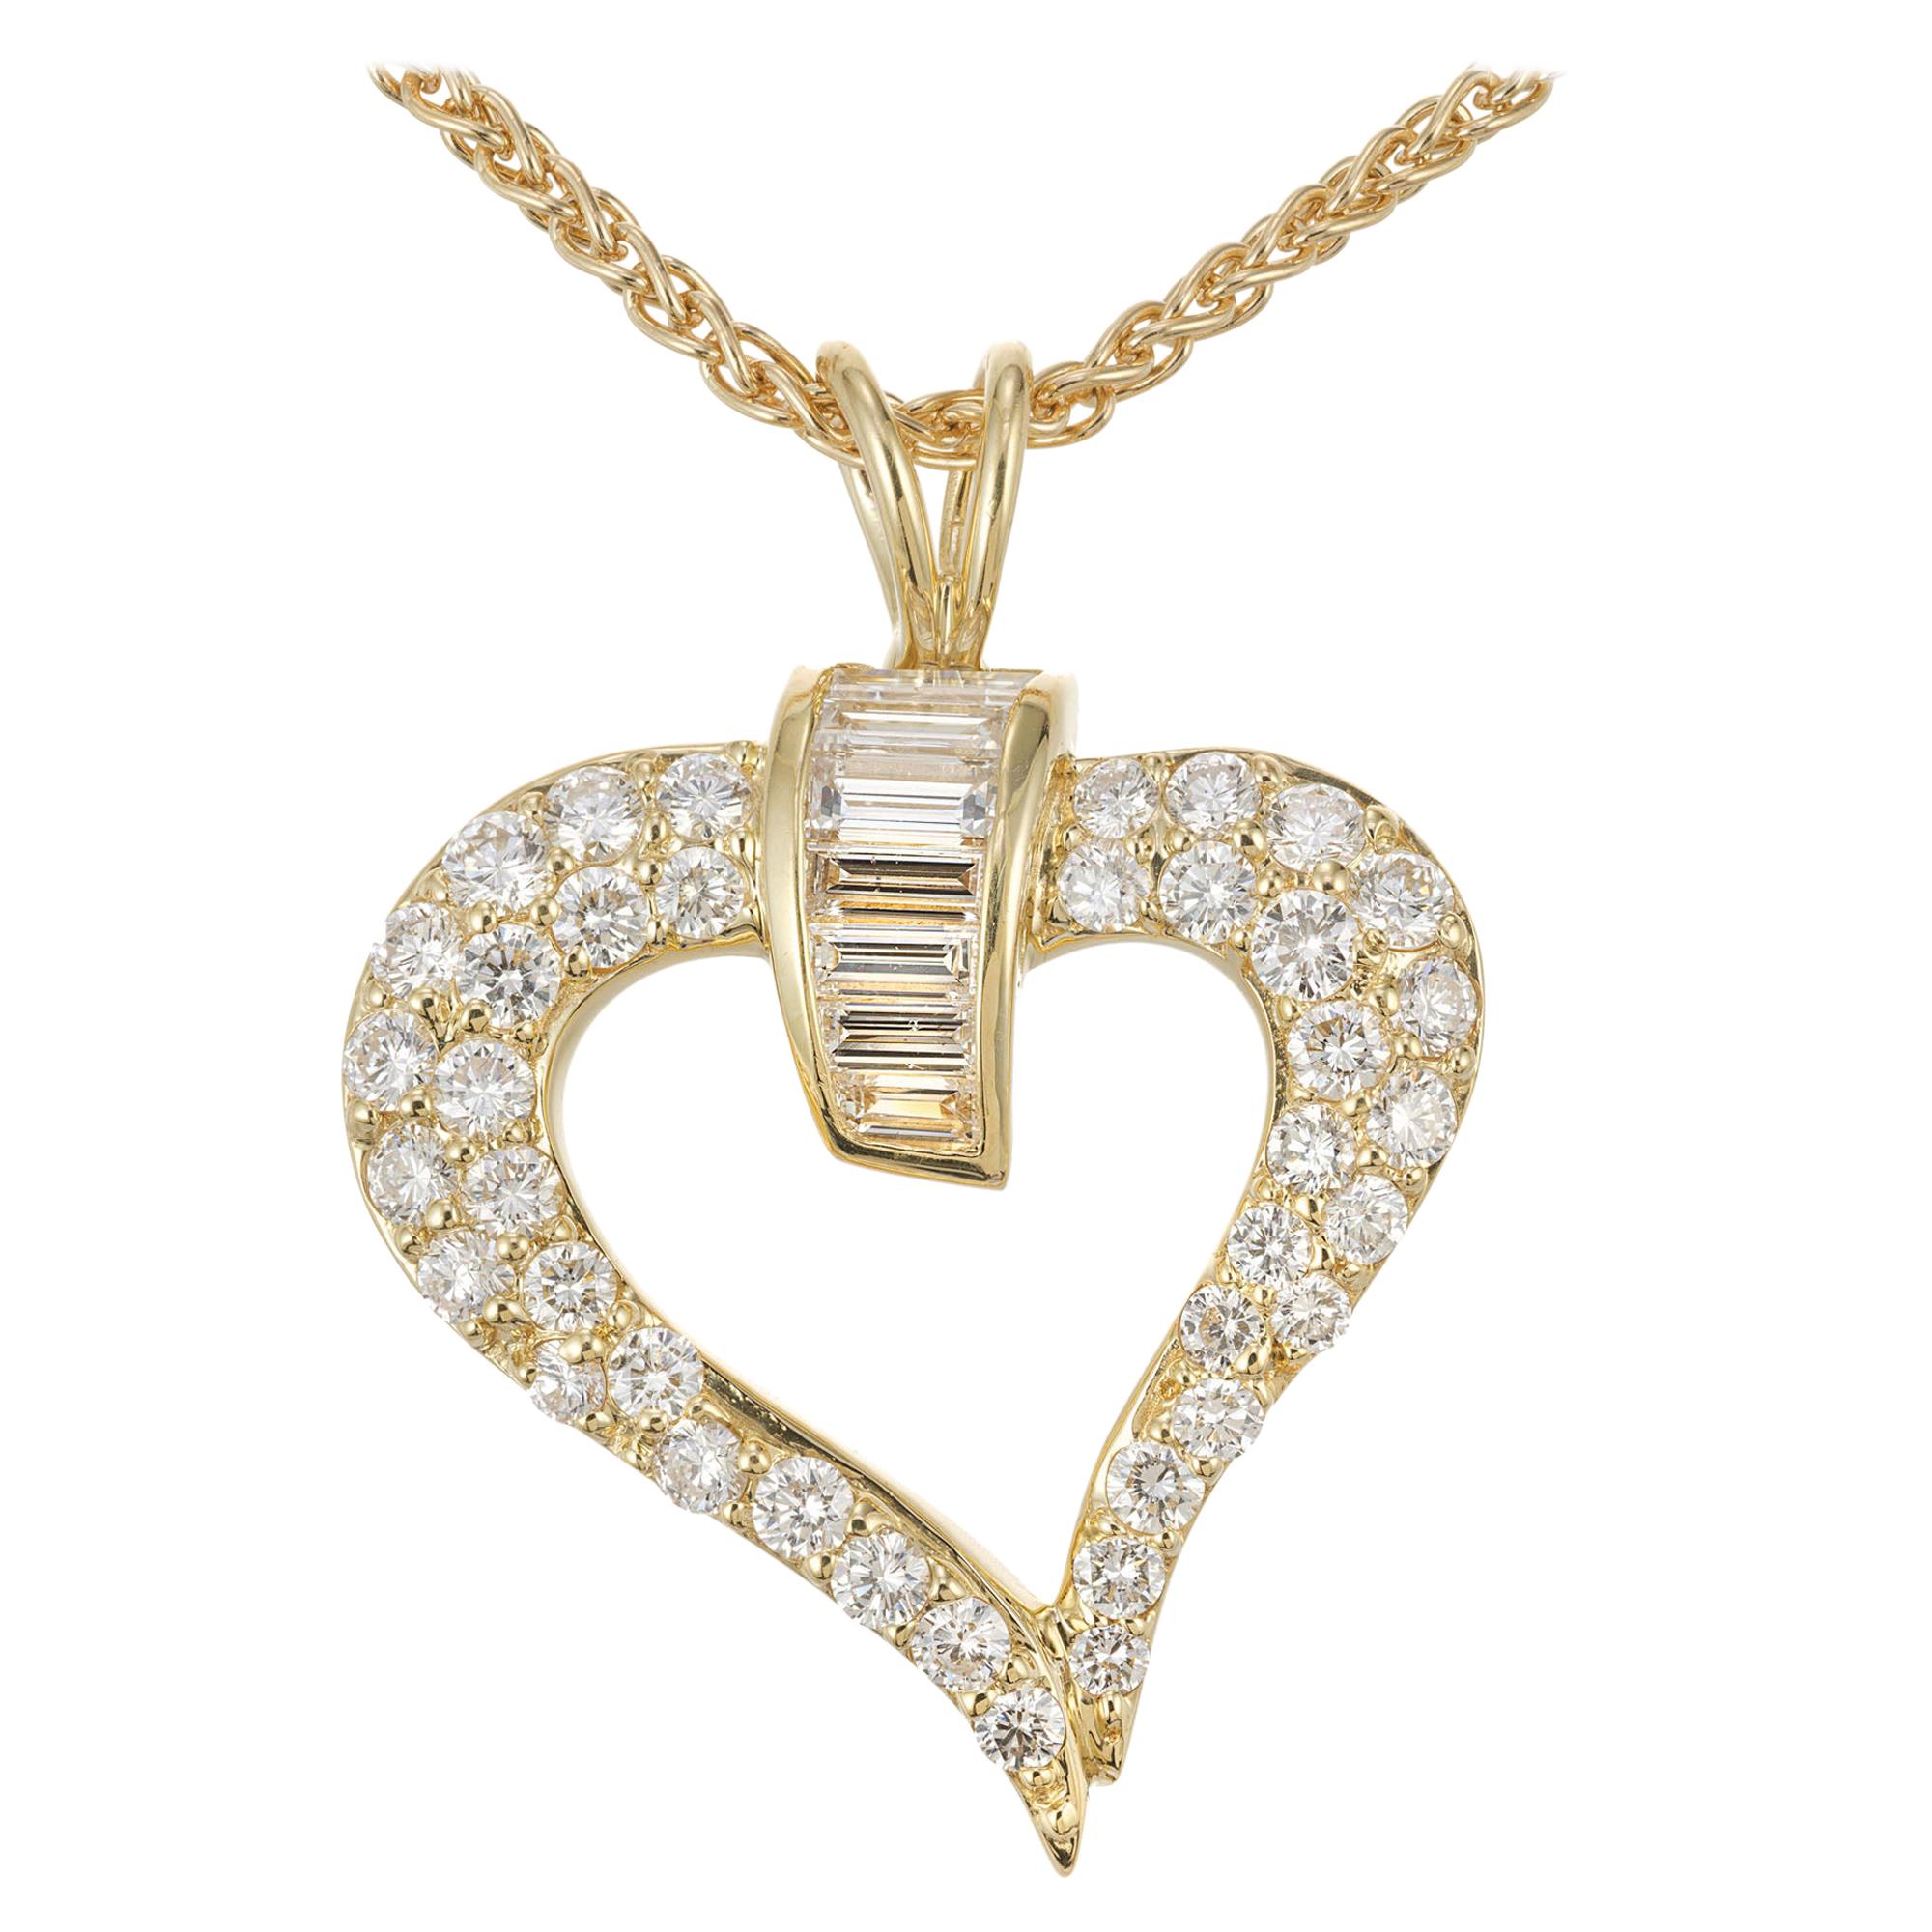 2.05 Carat Diamond Yellow Gold Heart Pendant Necklace For Sale